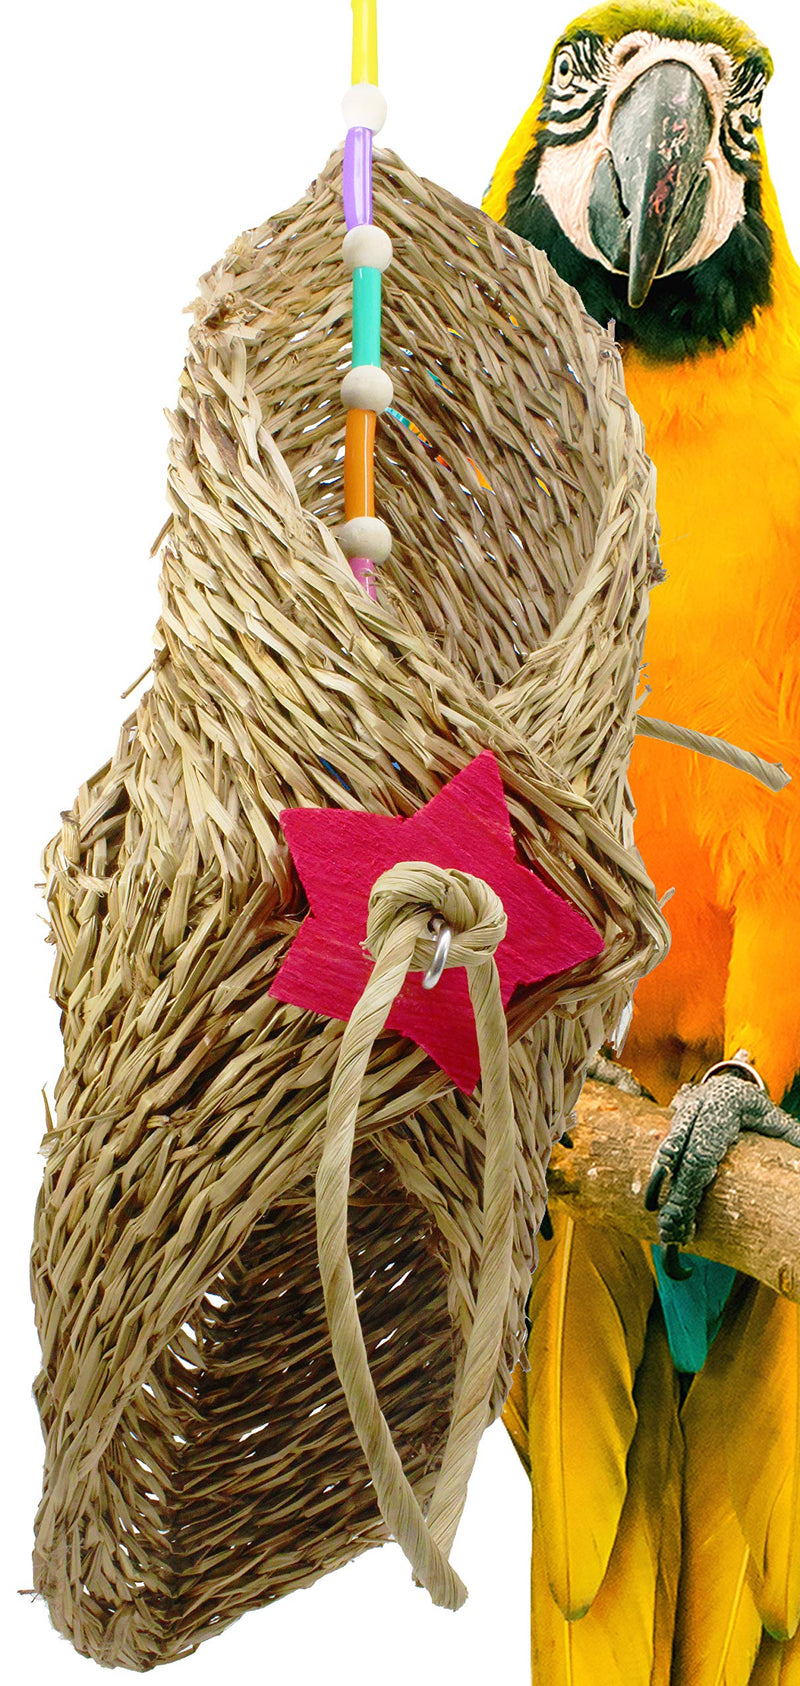 [Australia] - Bonka Bird Toys Foraging Jumbo Taco Bouquet Shredding Parrot Toy, Brightly Colored Natural Raffia and Palm Leaf. Quality Product Hand Made in The USA. Large Taco 